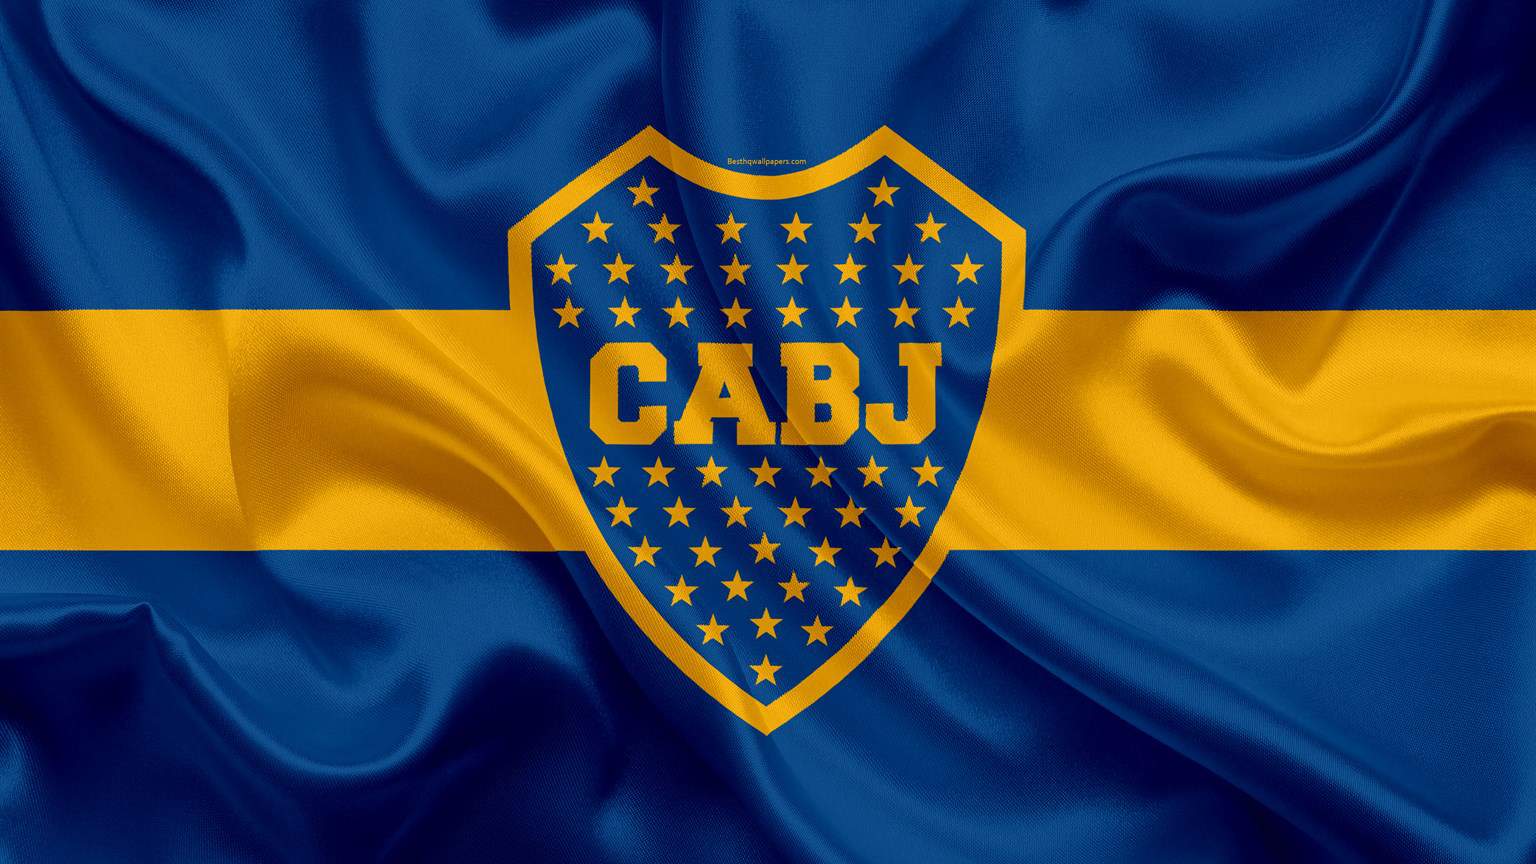 Argentina’s-largest-soccer-team,-boca-juniors,-is-considering-to-launch-a-club-nft